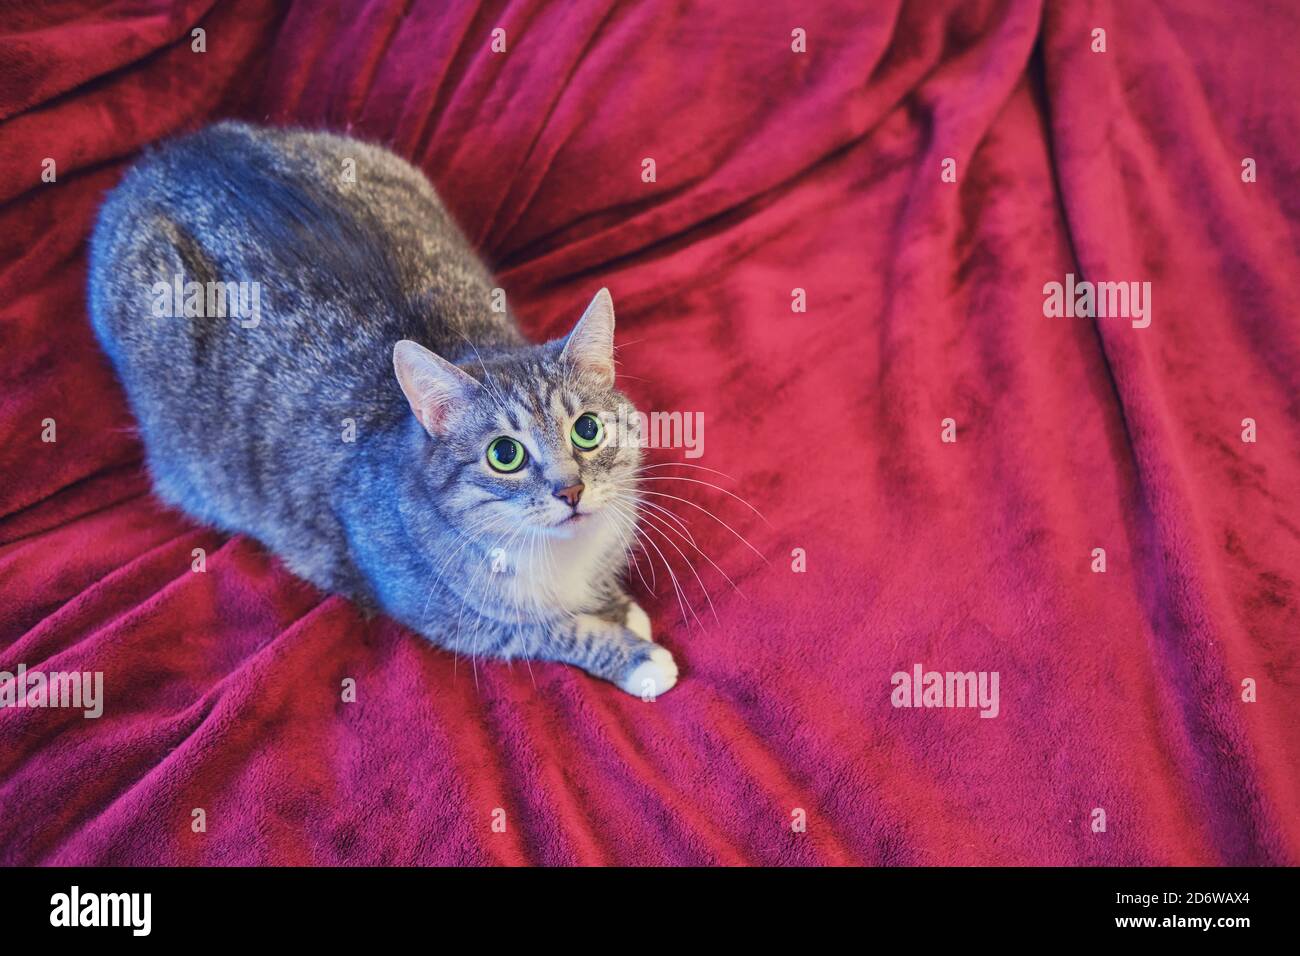 A scared cat on a red bed looks plaintively with big green eyes, copy space for text Stock Photo